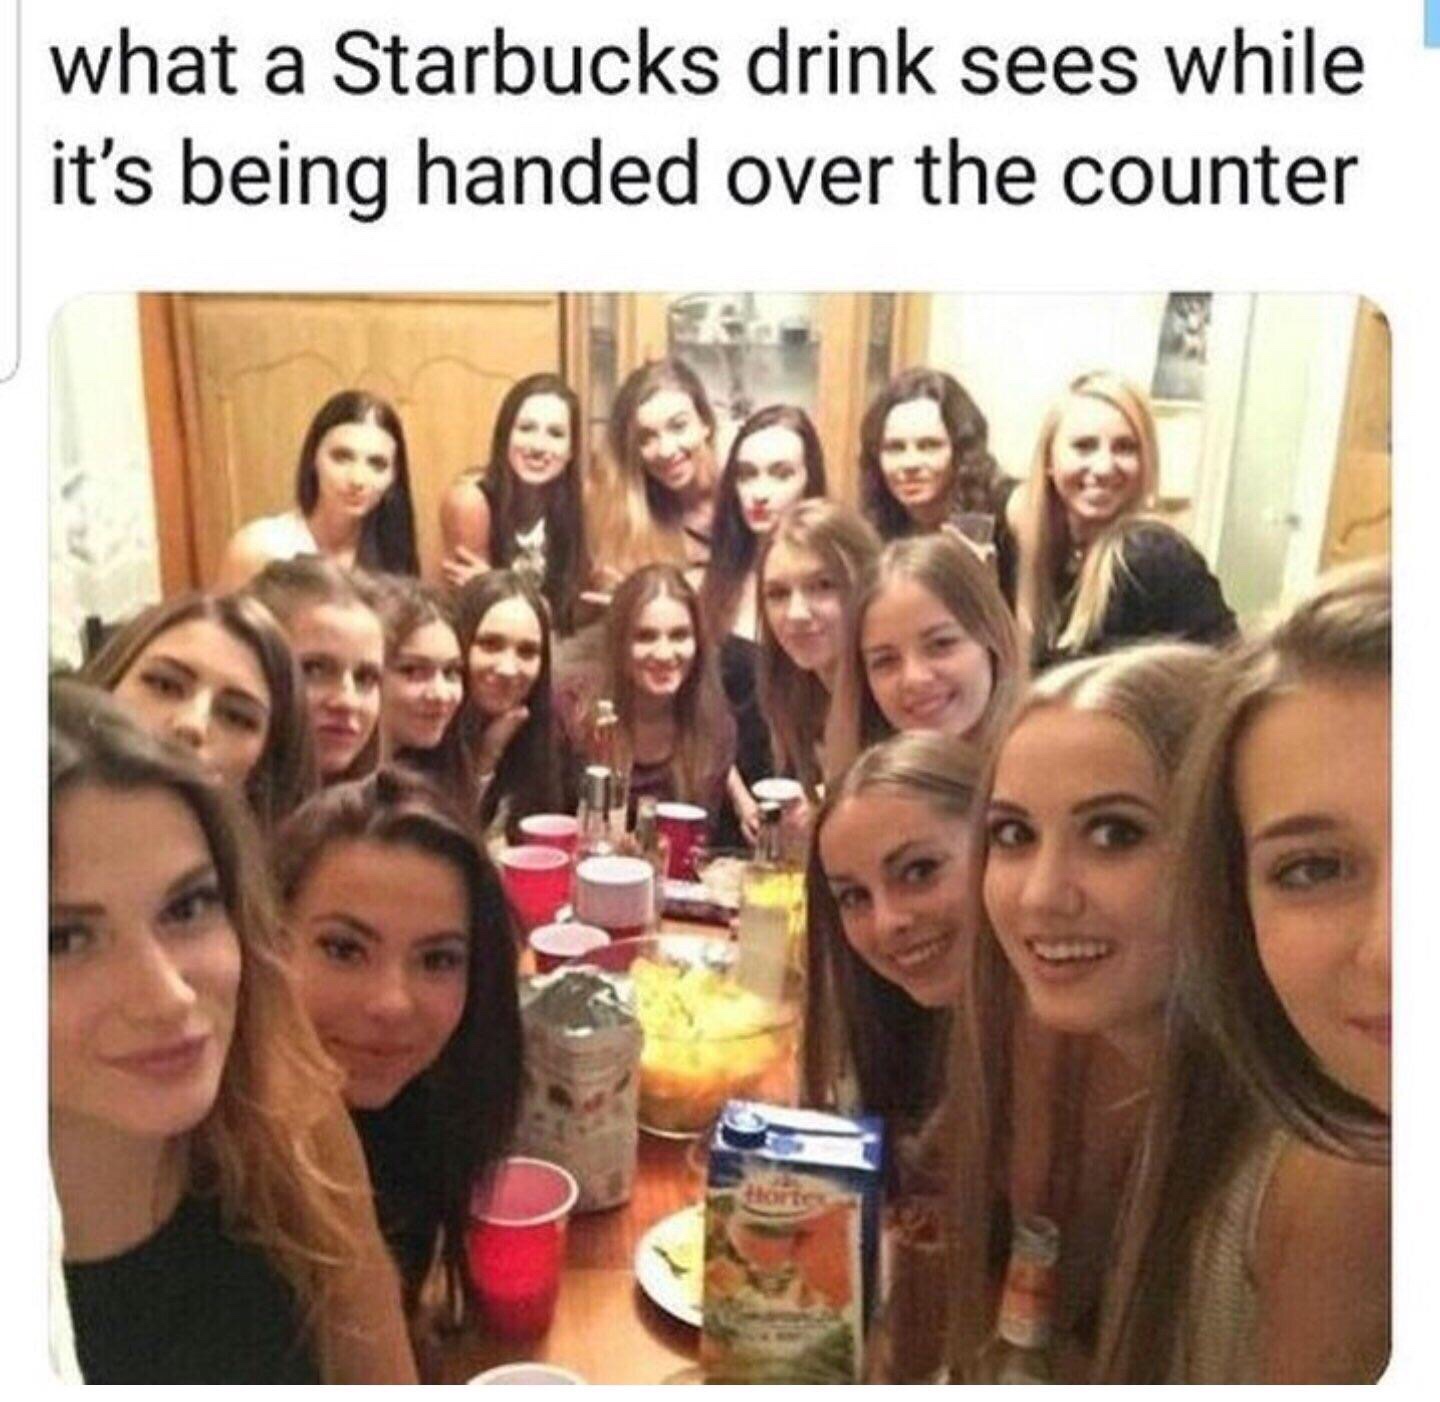 starbucks drink sees meme - what a Starbucks drink sees while it's being handed over the counter